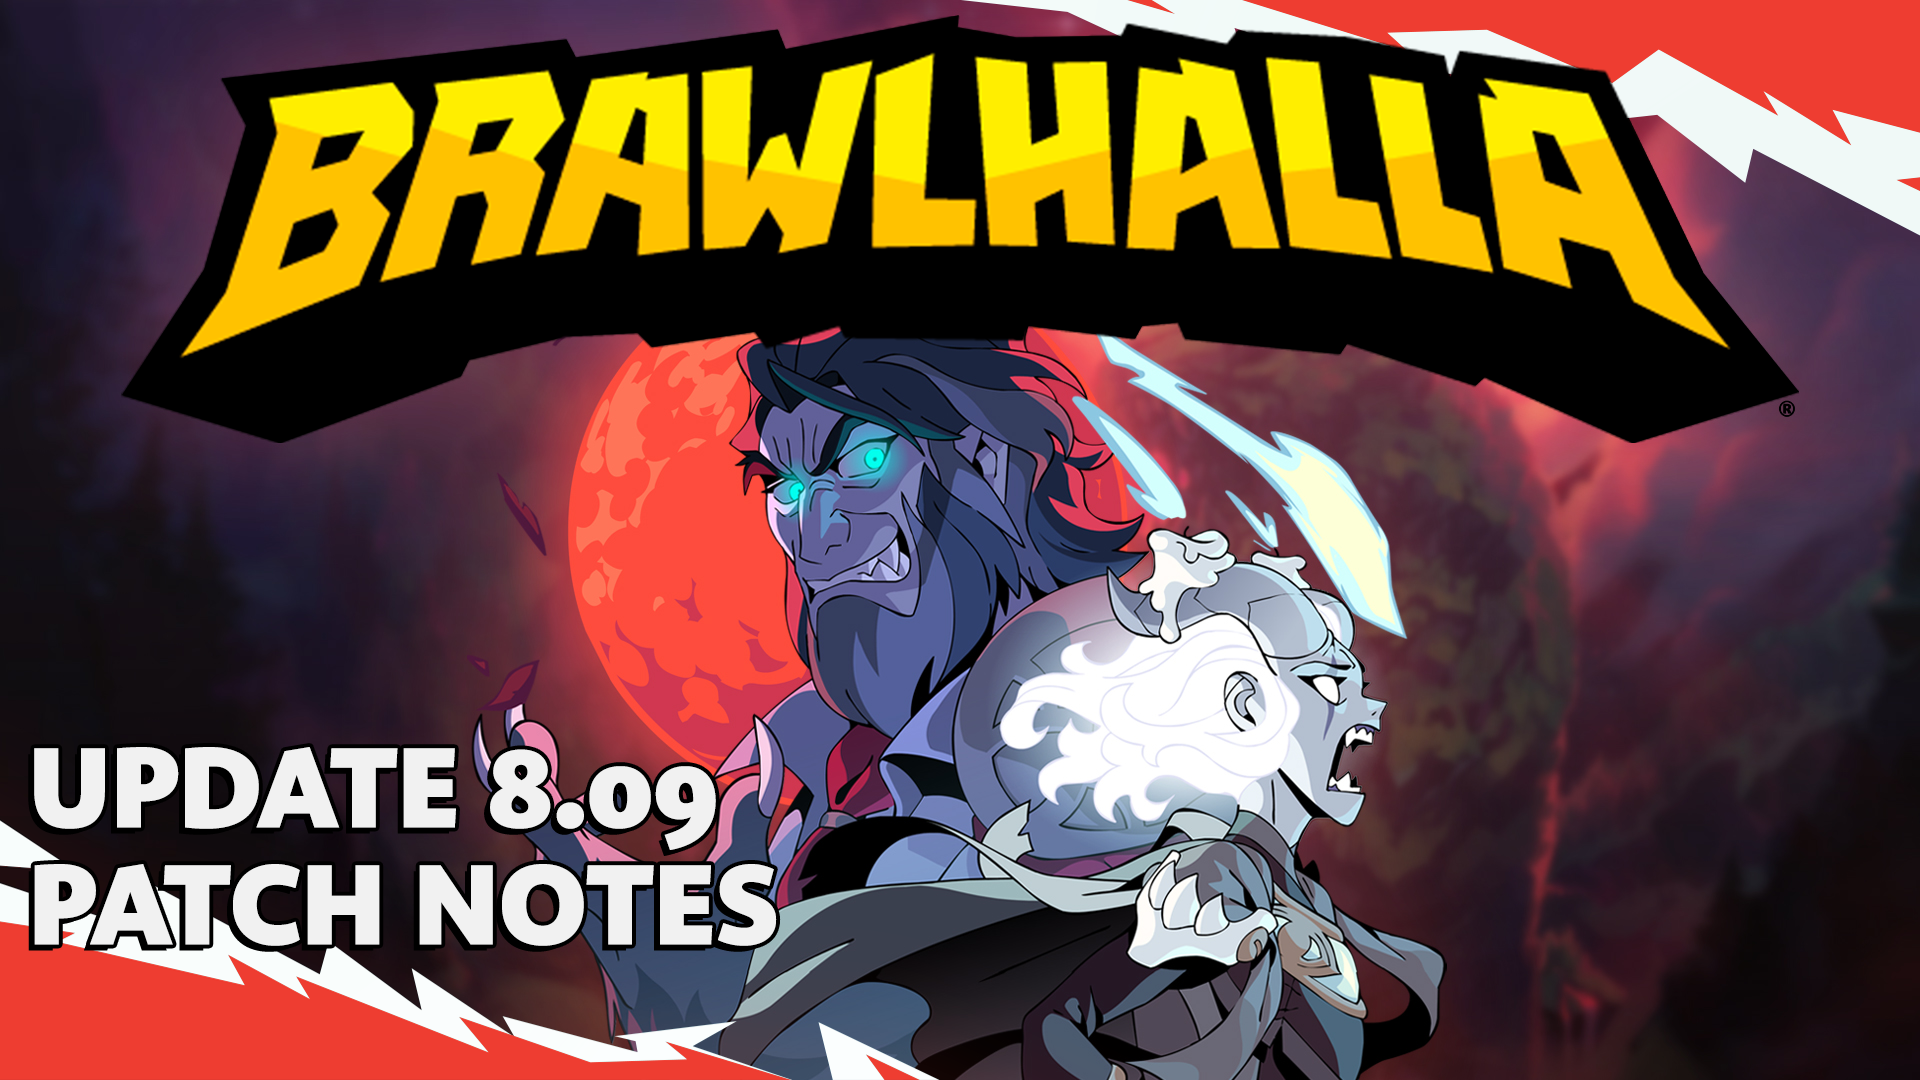 Battle Pass Classic 4, Brawlhalla Fest, and New Store UI! – Patch 8.09